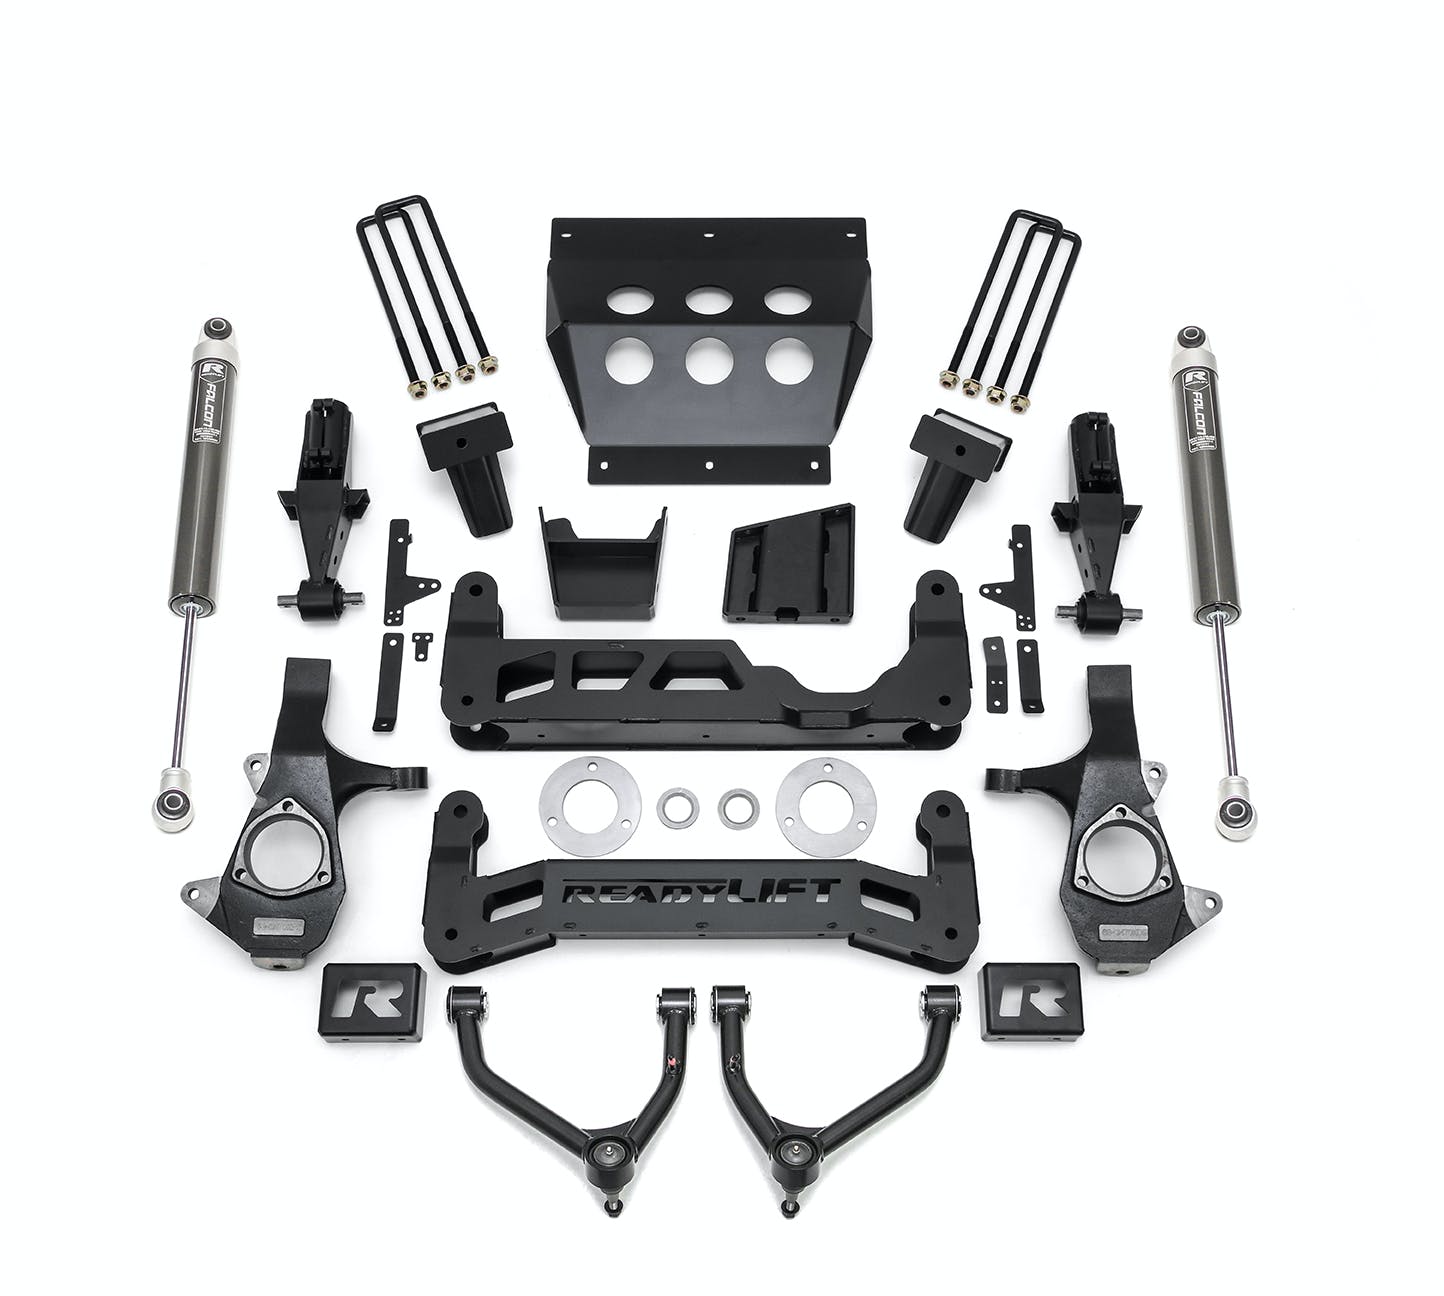 ReadyLIFT 44-34720 7" Big Lift Kit with Upper Control Arms for Stamped Steel OE Upper Control Arms